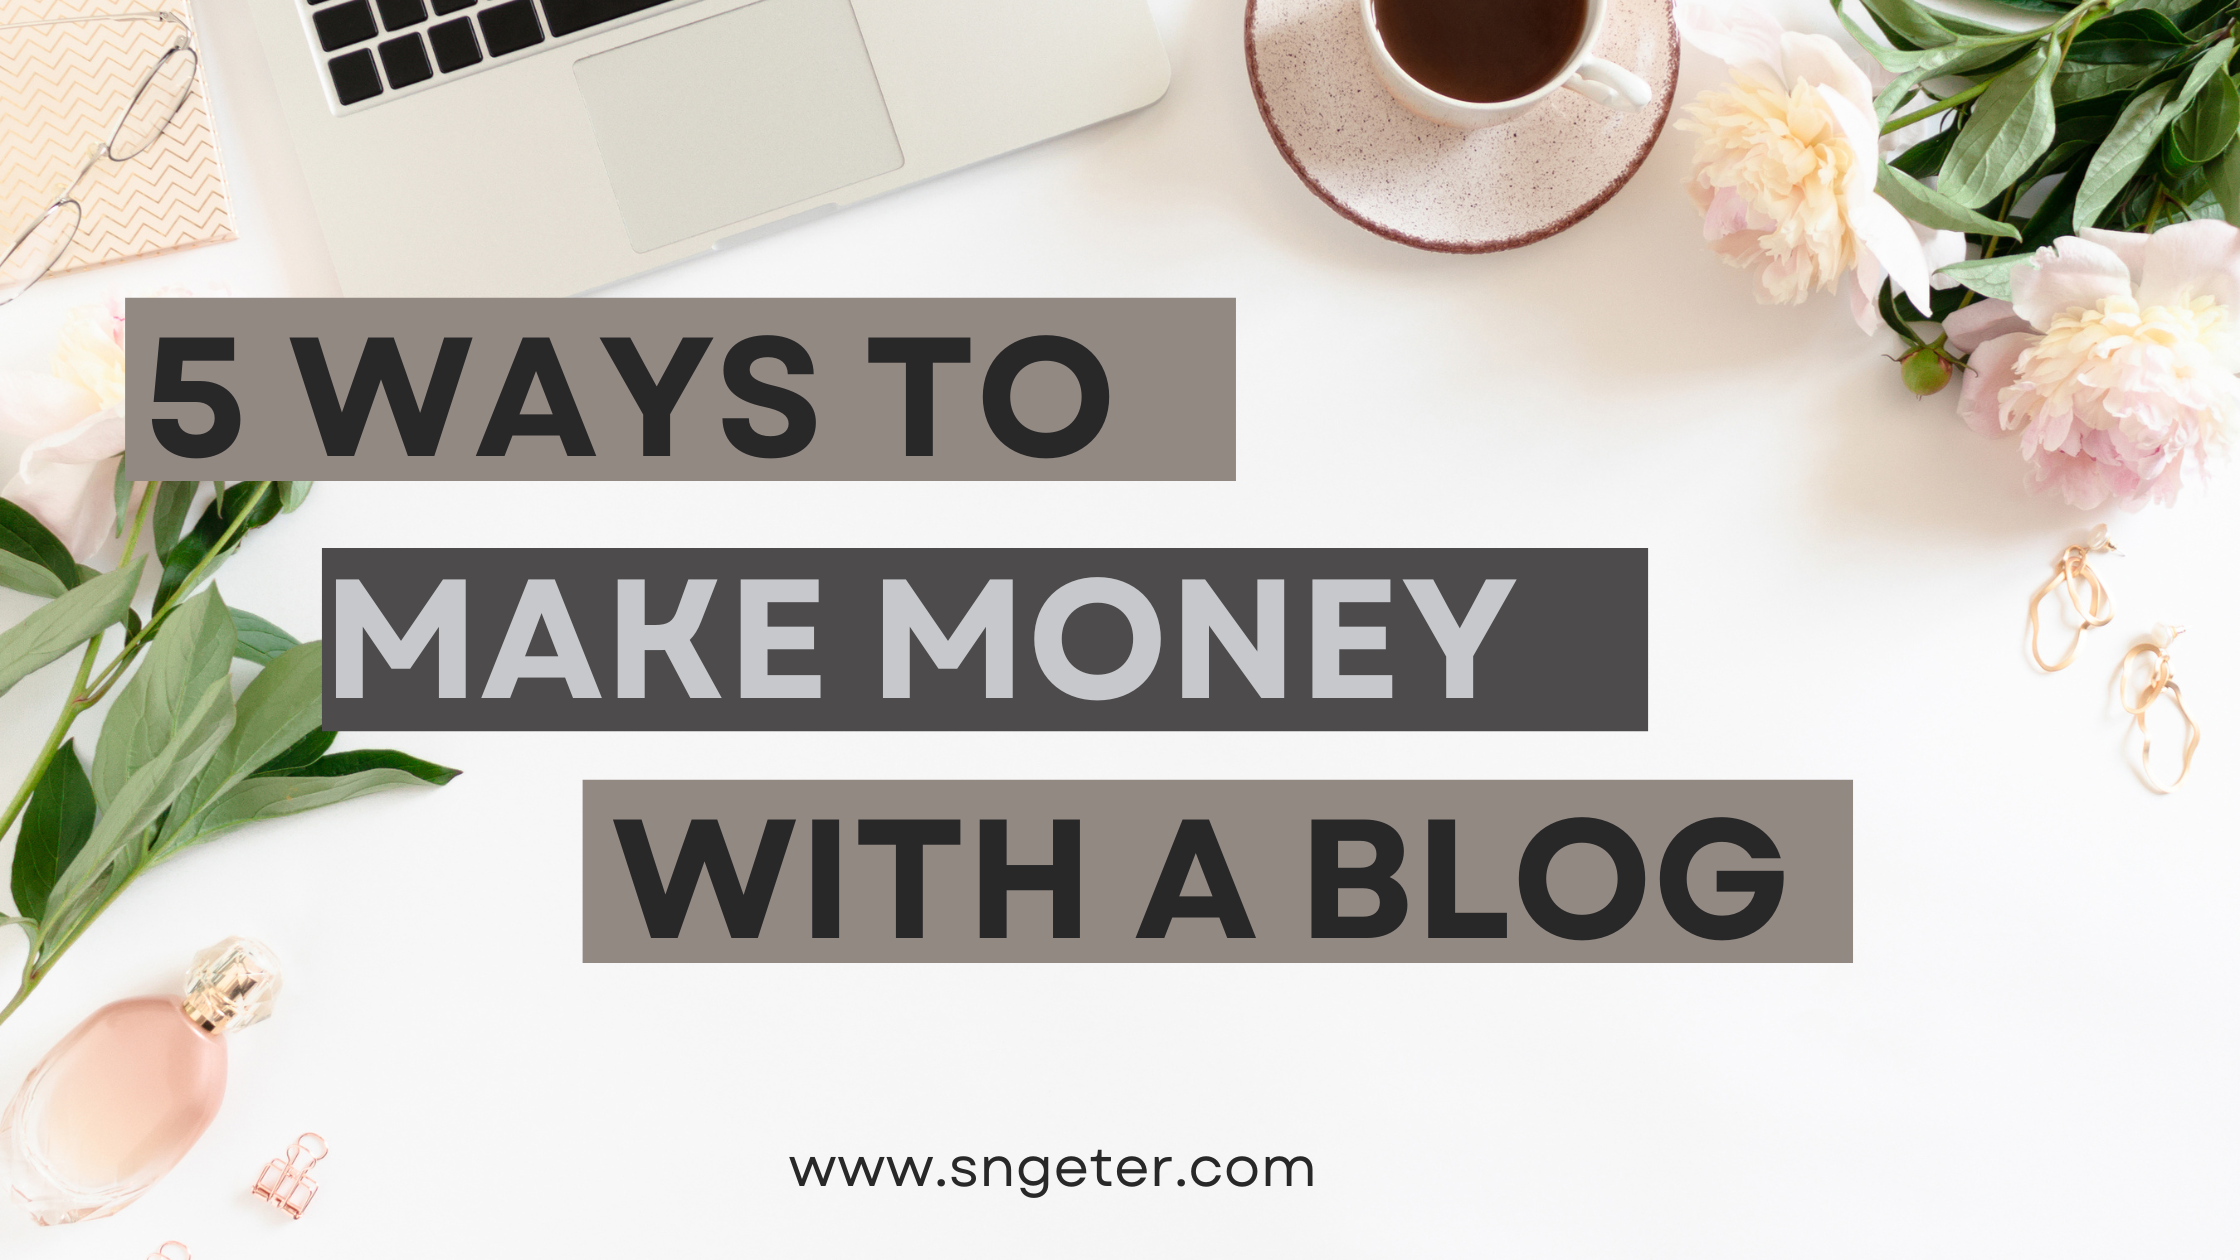 Five Ways to Make Money With a Blog